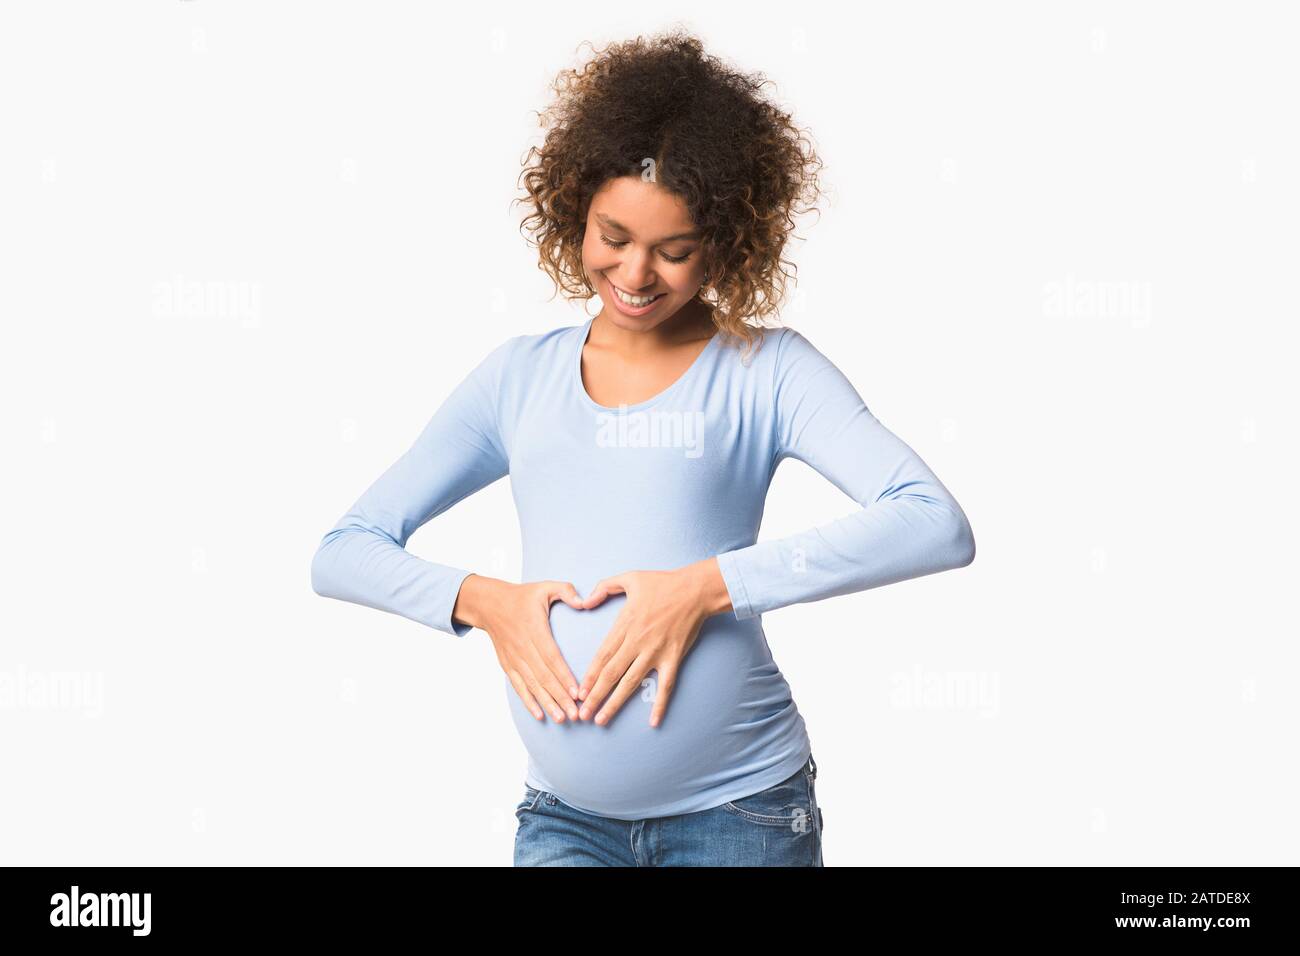 Happy expectation. Black pregnant woman forming heart shape on belly Stock Photo